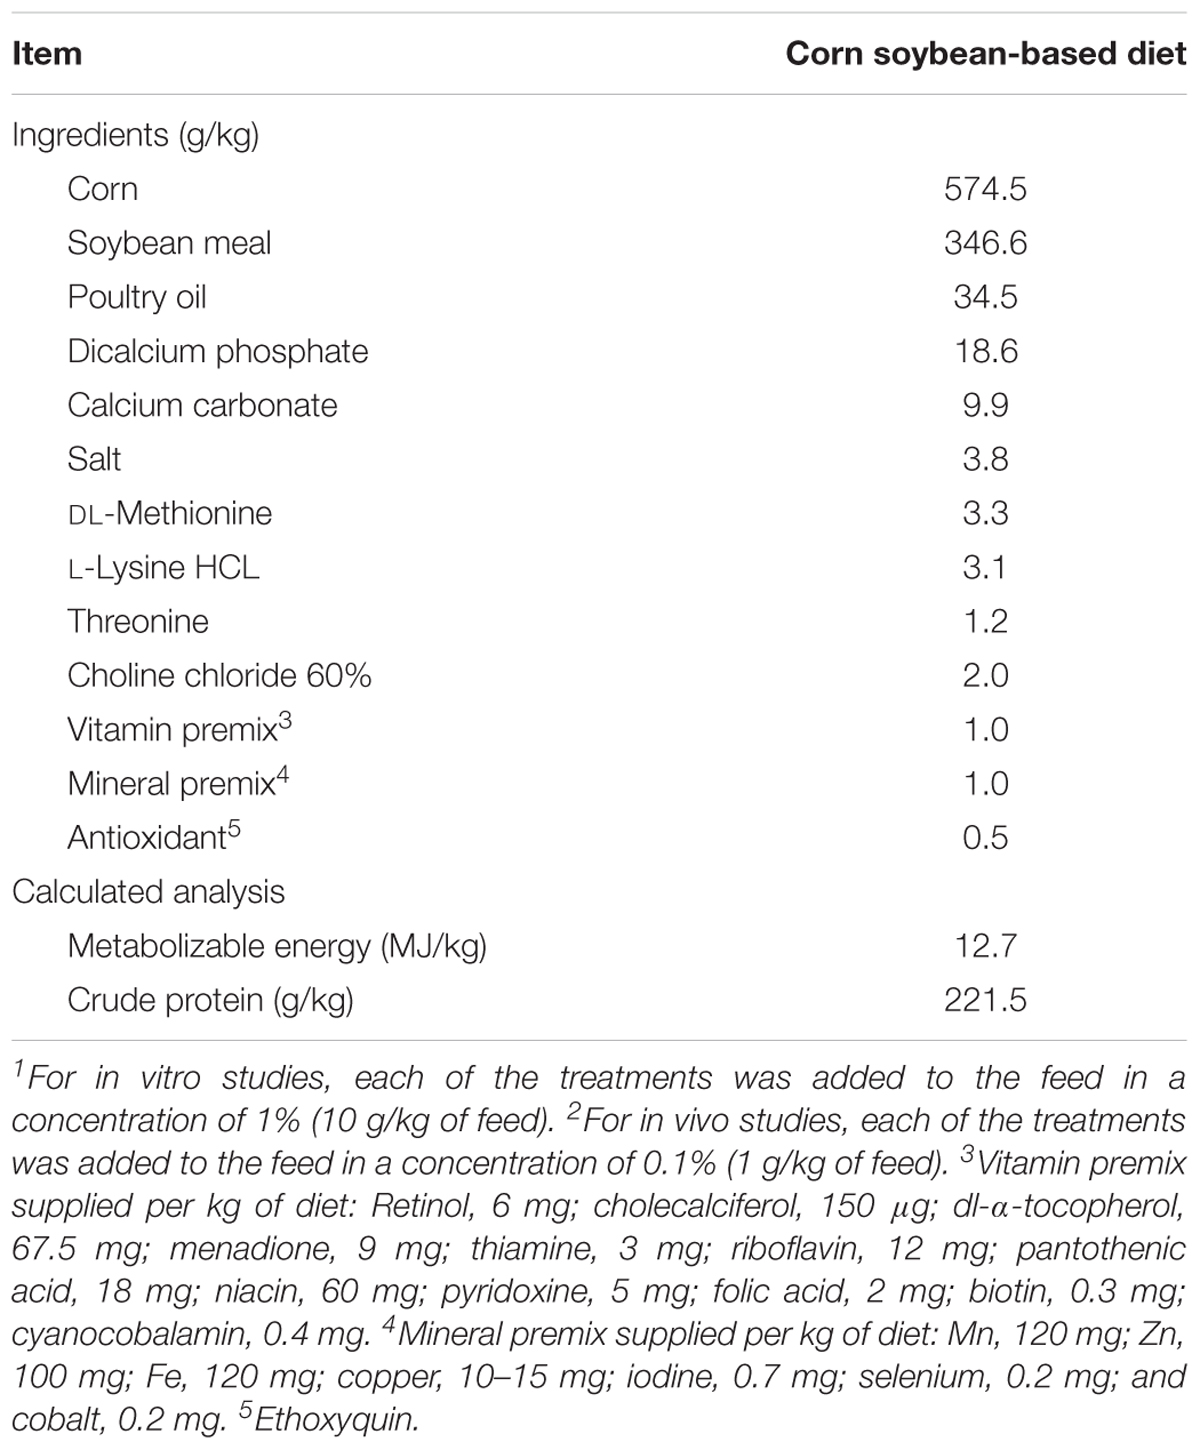 Frontiers Evaluation Of A Solid Dispersion Of Curcumin With Polyvinylpyrrolidone And Boric Acid Against Salmonella Enteritidis Infection And Intestinal Permeability In Broiler Chickens A Pilot Study Microbiology